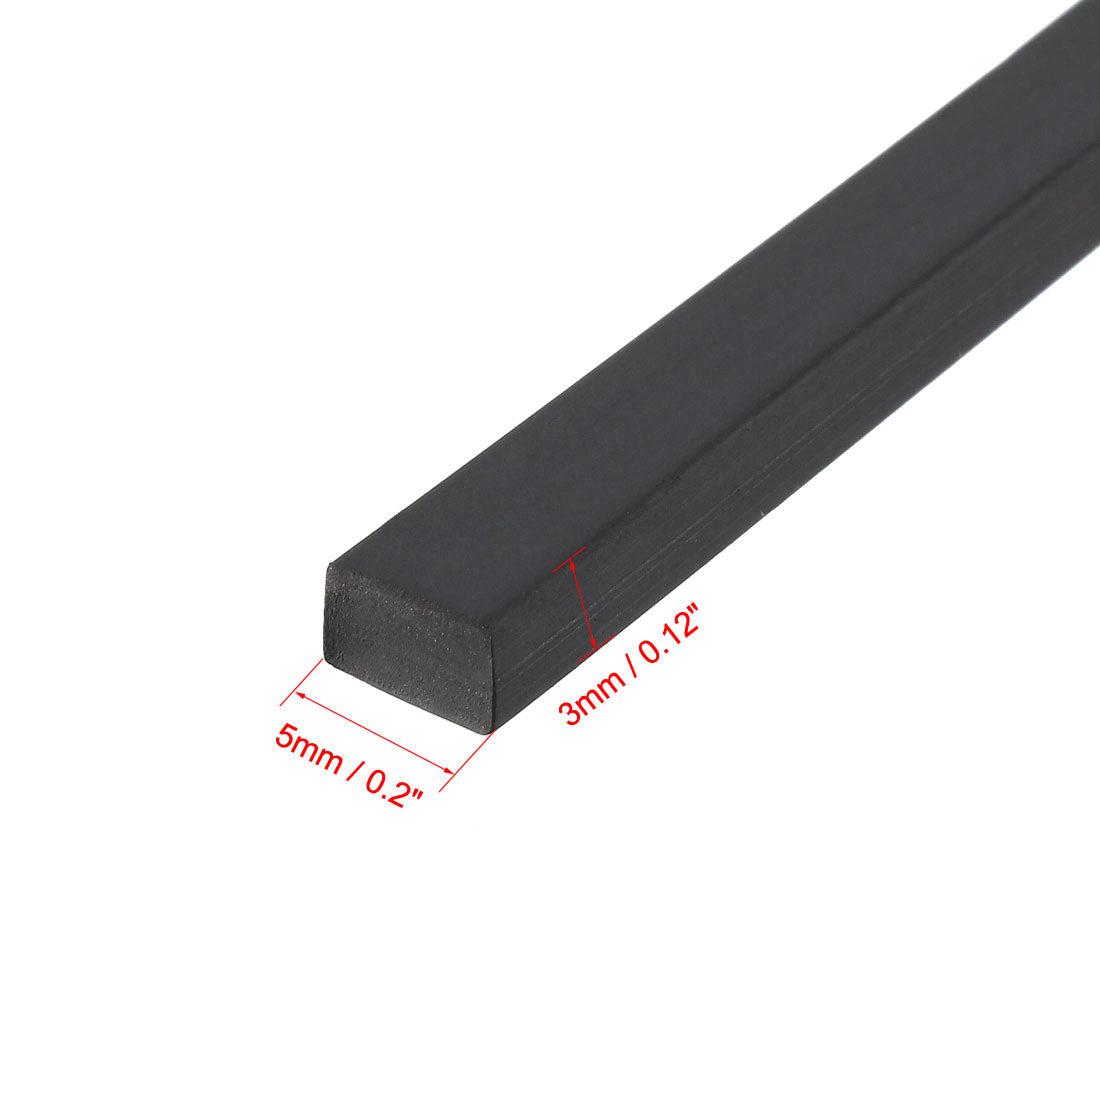 uxcell Uxcell Solid Rectangle Rubber Seal Strip 5mm Wide 3mm Thick, 5 Meters Long Black